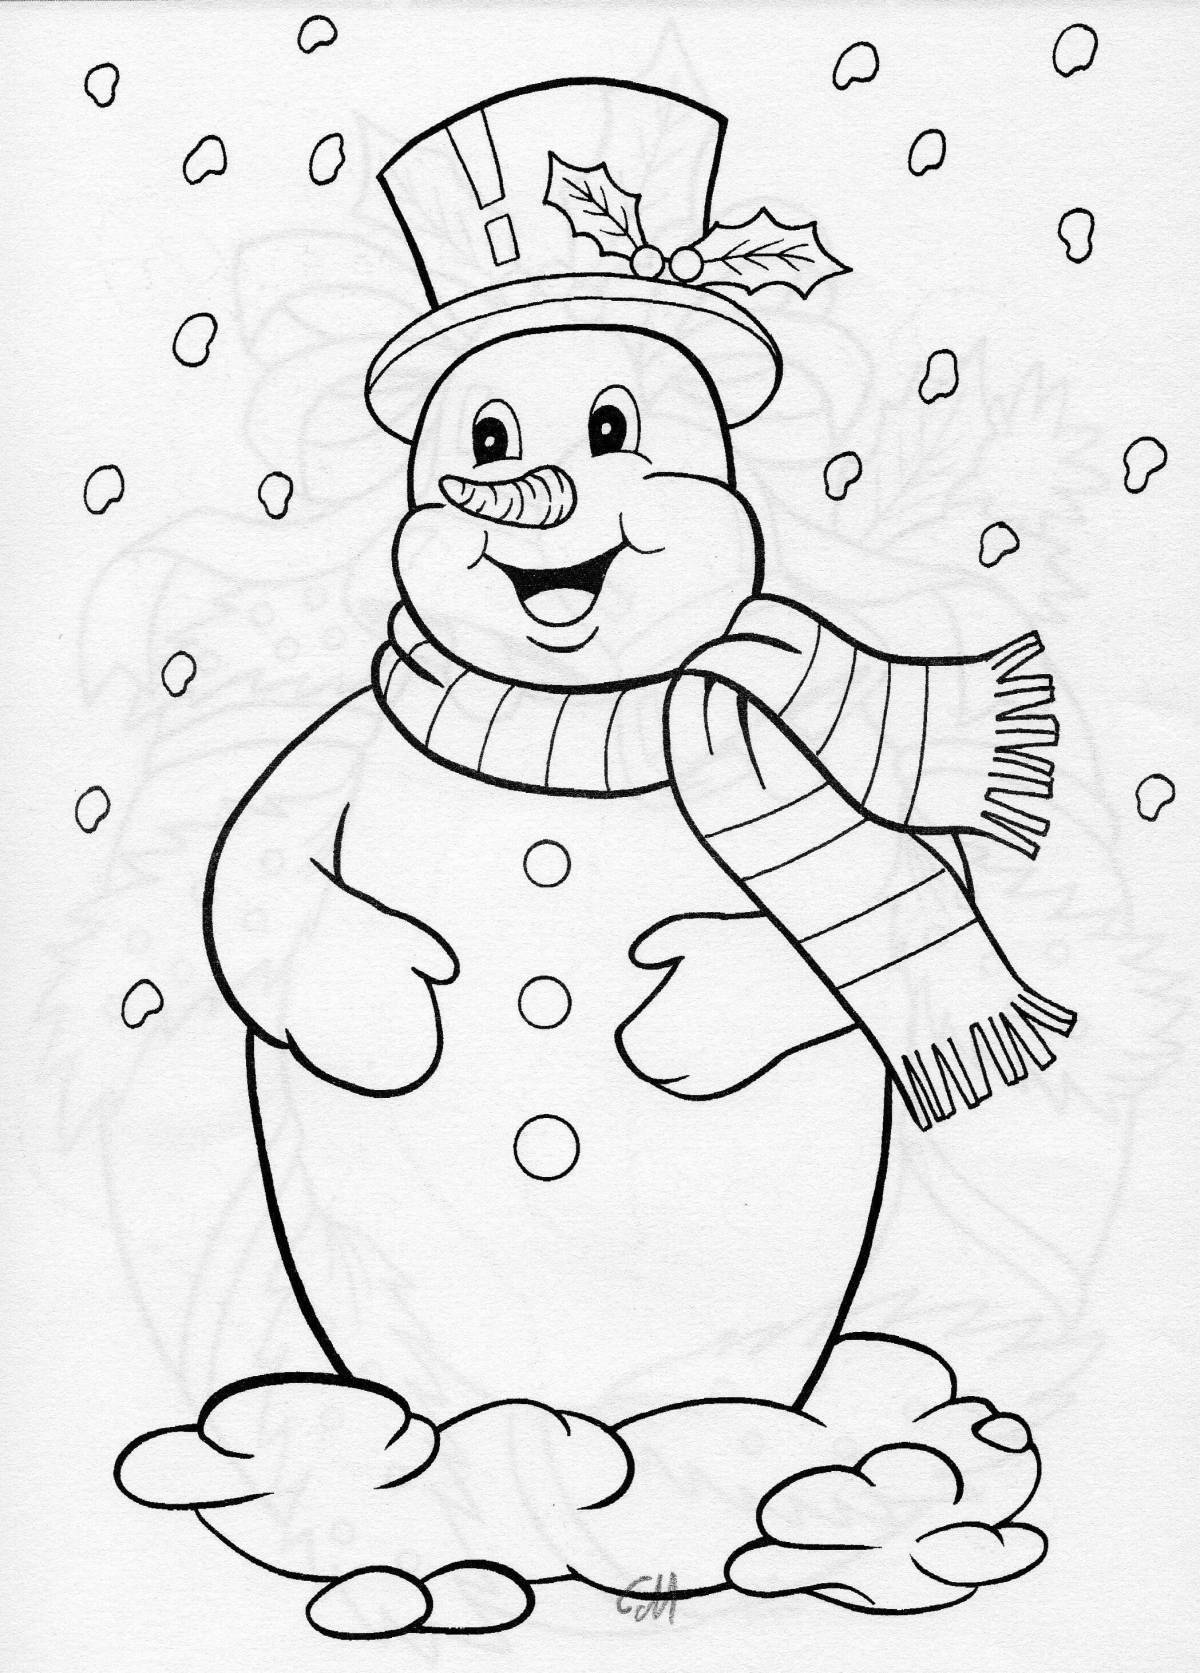 Exciting snowman birthday coloring book